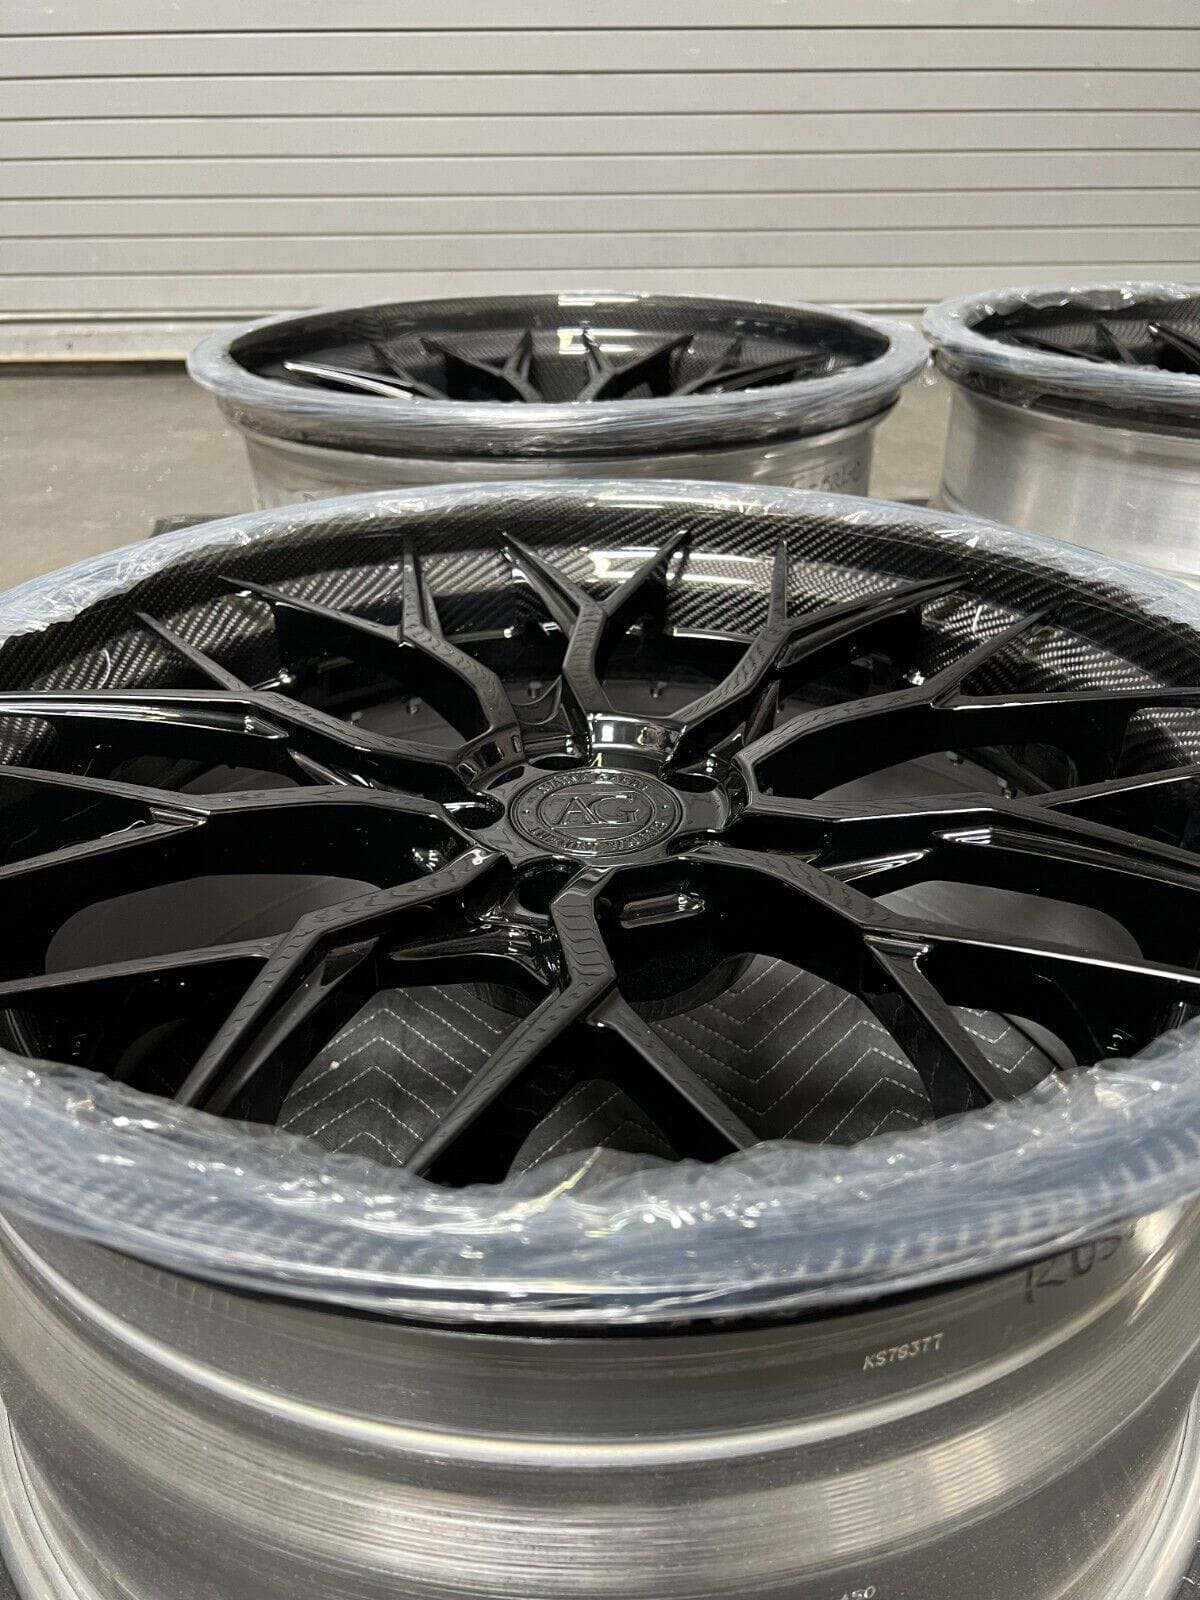 Wheels and Tires/Axles - Brand New Set of AGL43 Forged Wheels IN STOCK - New - 0  All Models - Las Vegas, NV 89118, United States